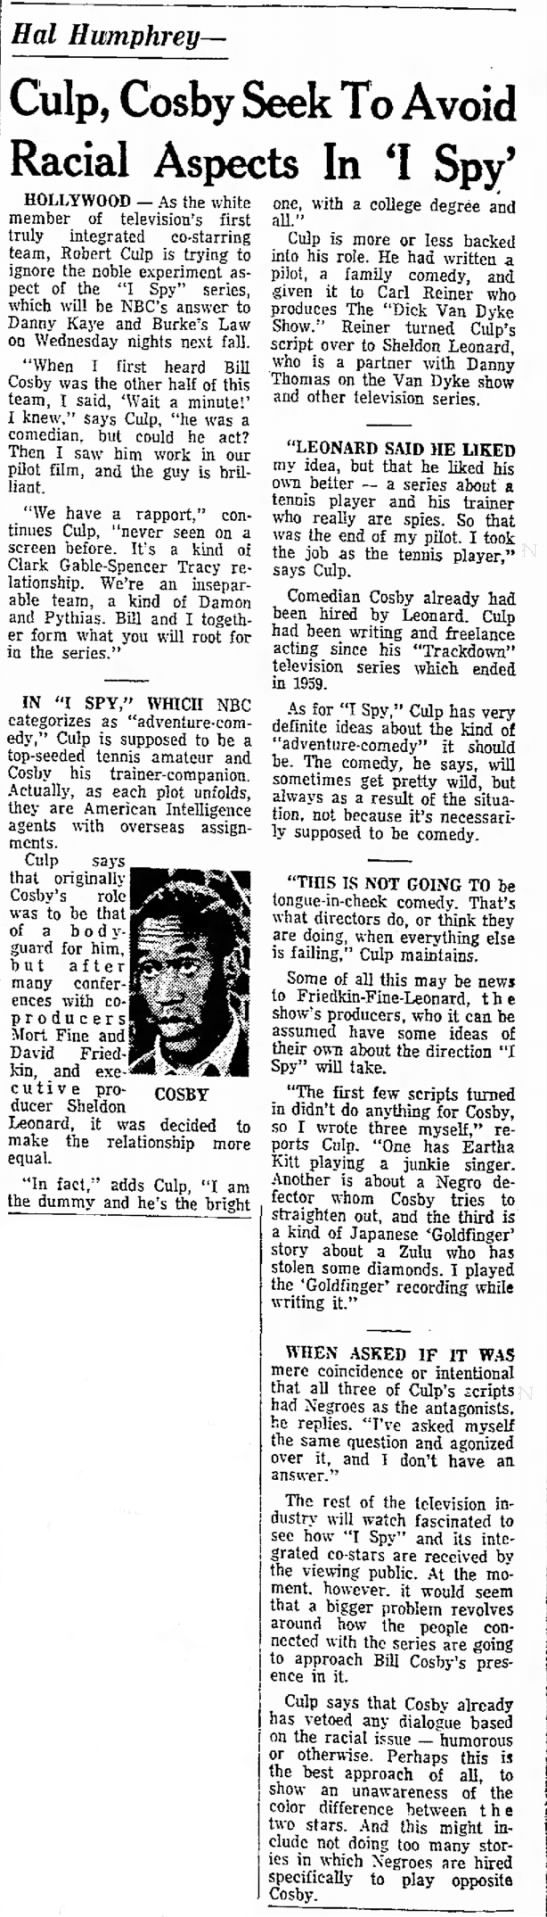 Culp, Cosby Seek to Avoid Racial Aspects in "I Spy" - May 17, 1965